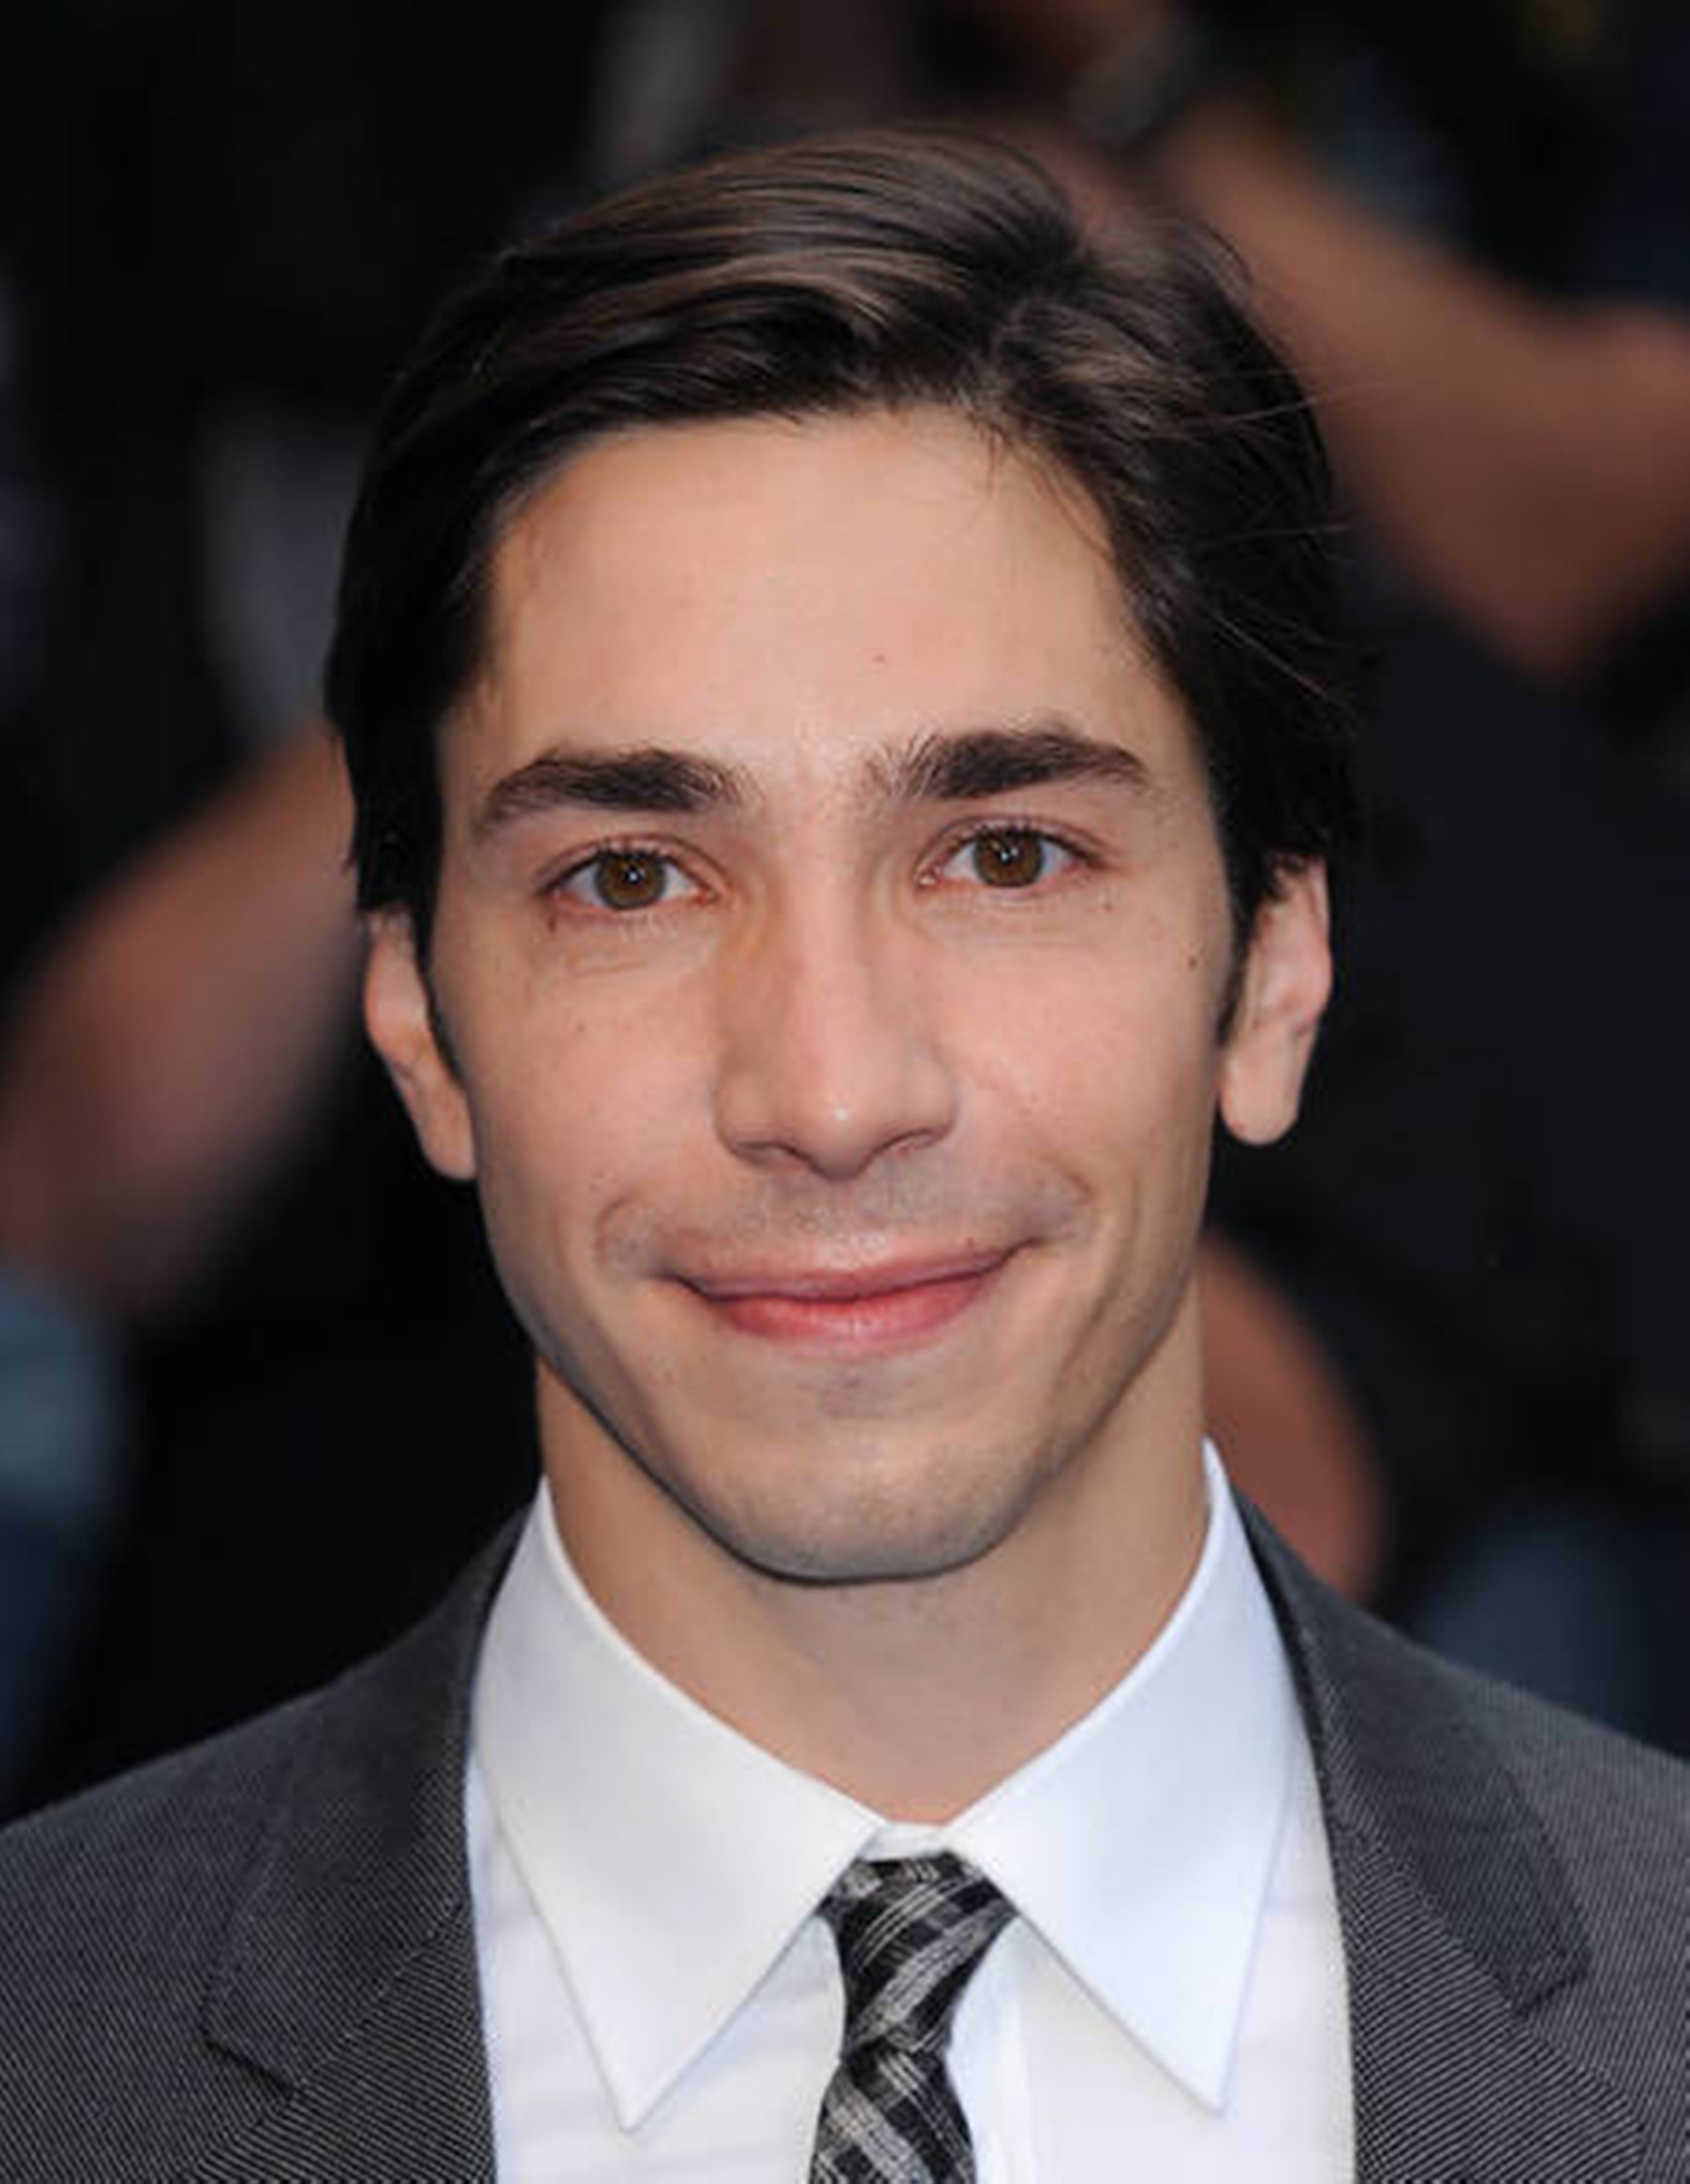 Justin Long to open fifth season of the Ringling College Digital Filmmaking Studio Lab